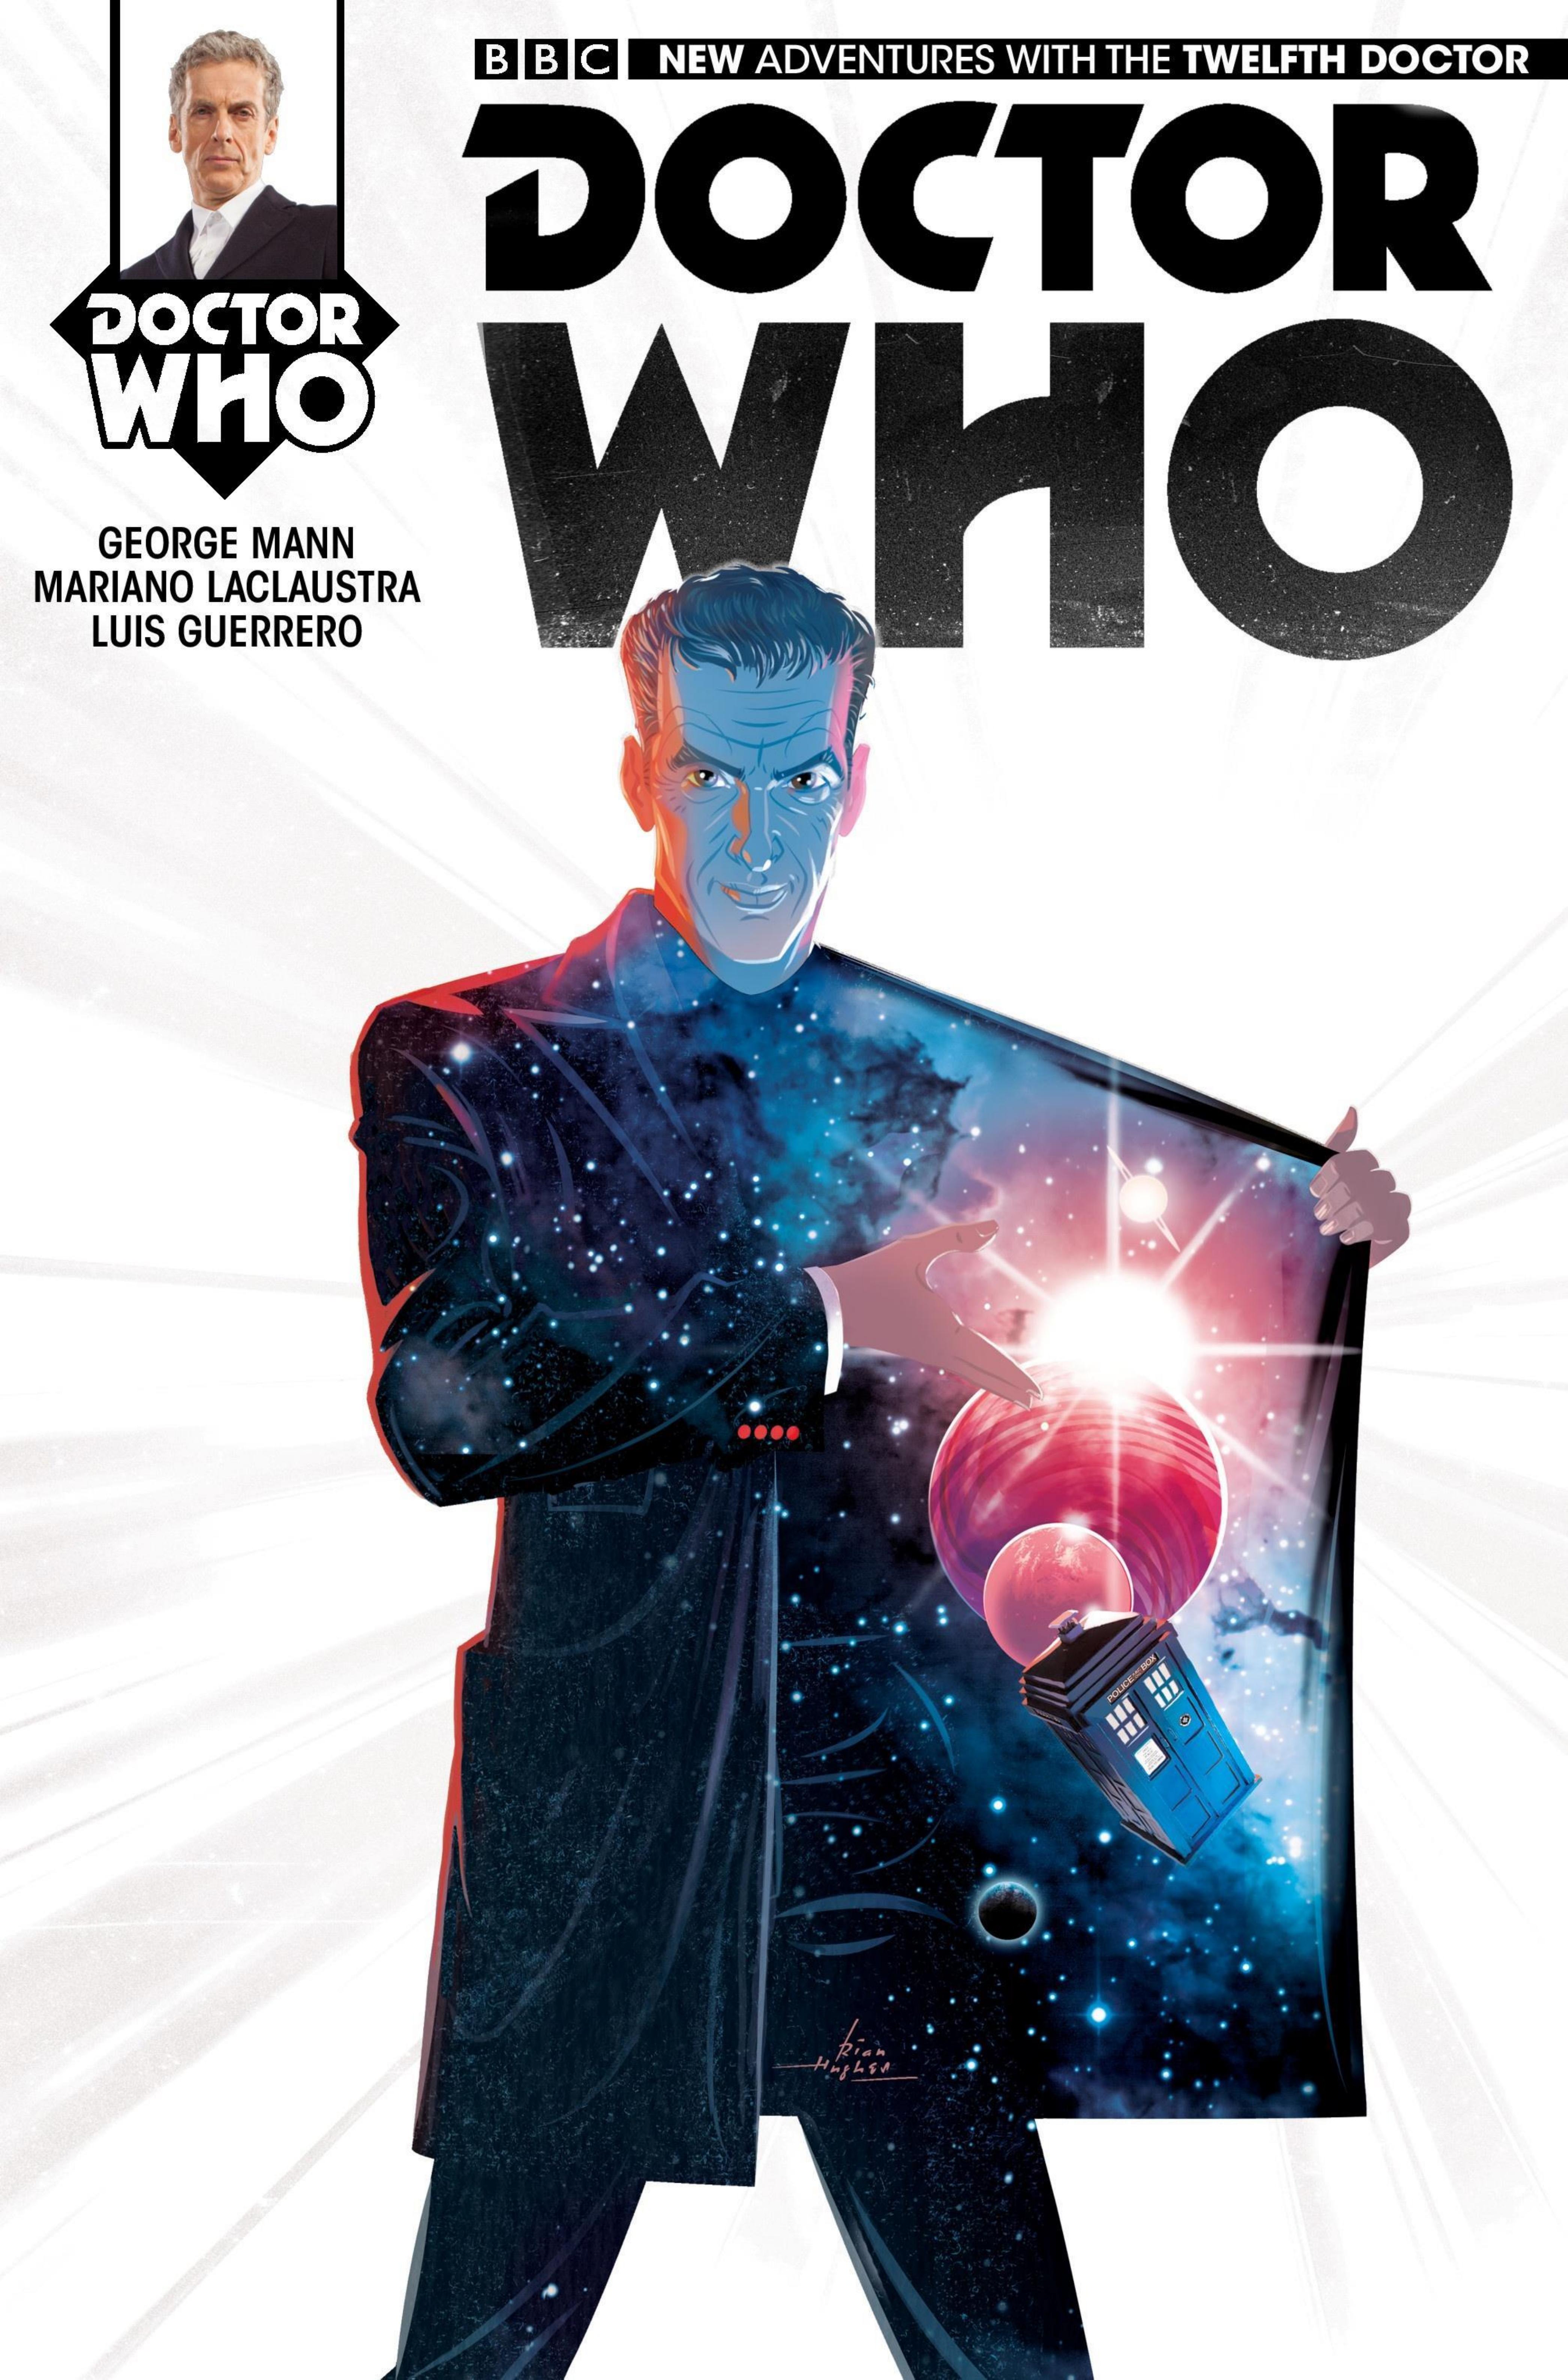 Doctor Who The Twelfth Doctor 011(2015)(2 covers)(Digital)(TLK-EMPIRE-HD) by ComicRack